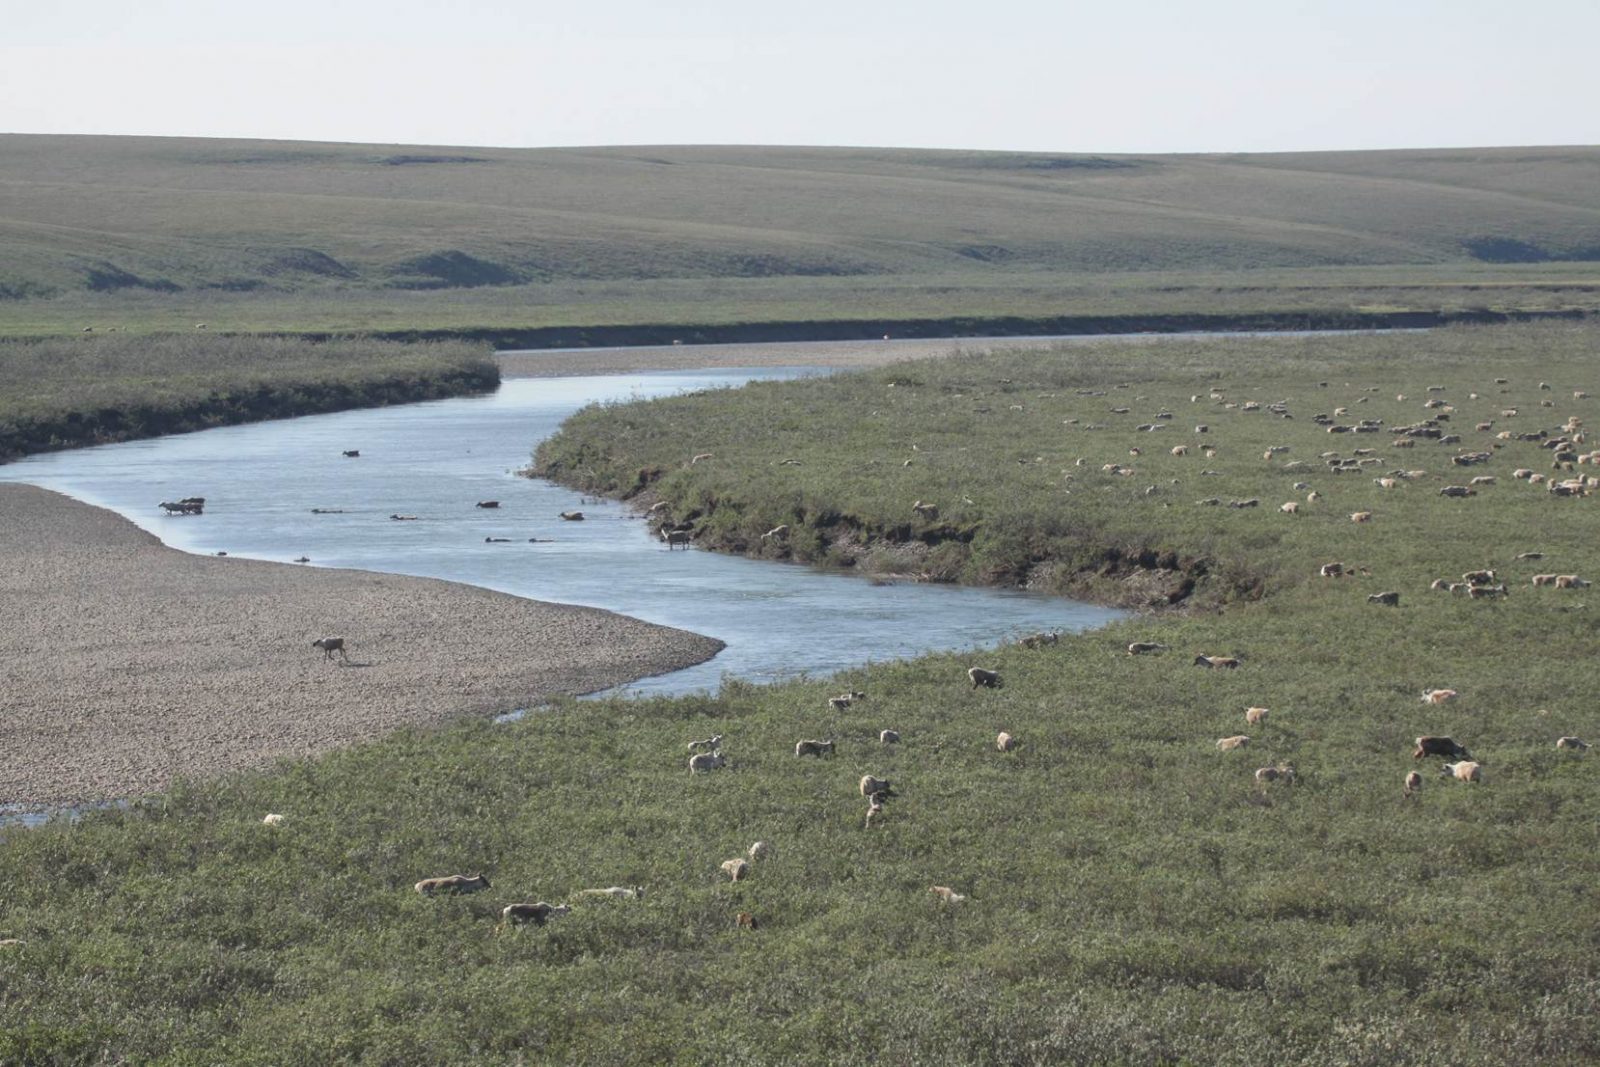 Caribou by water in the Western Arctic. The Biden administration should keep all oil extraction out of the Arctic to make good on its climate promises